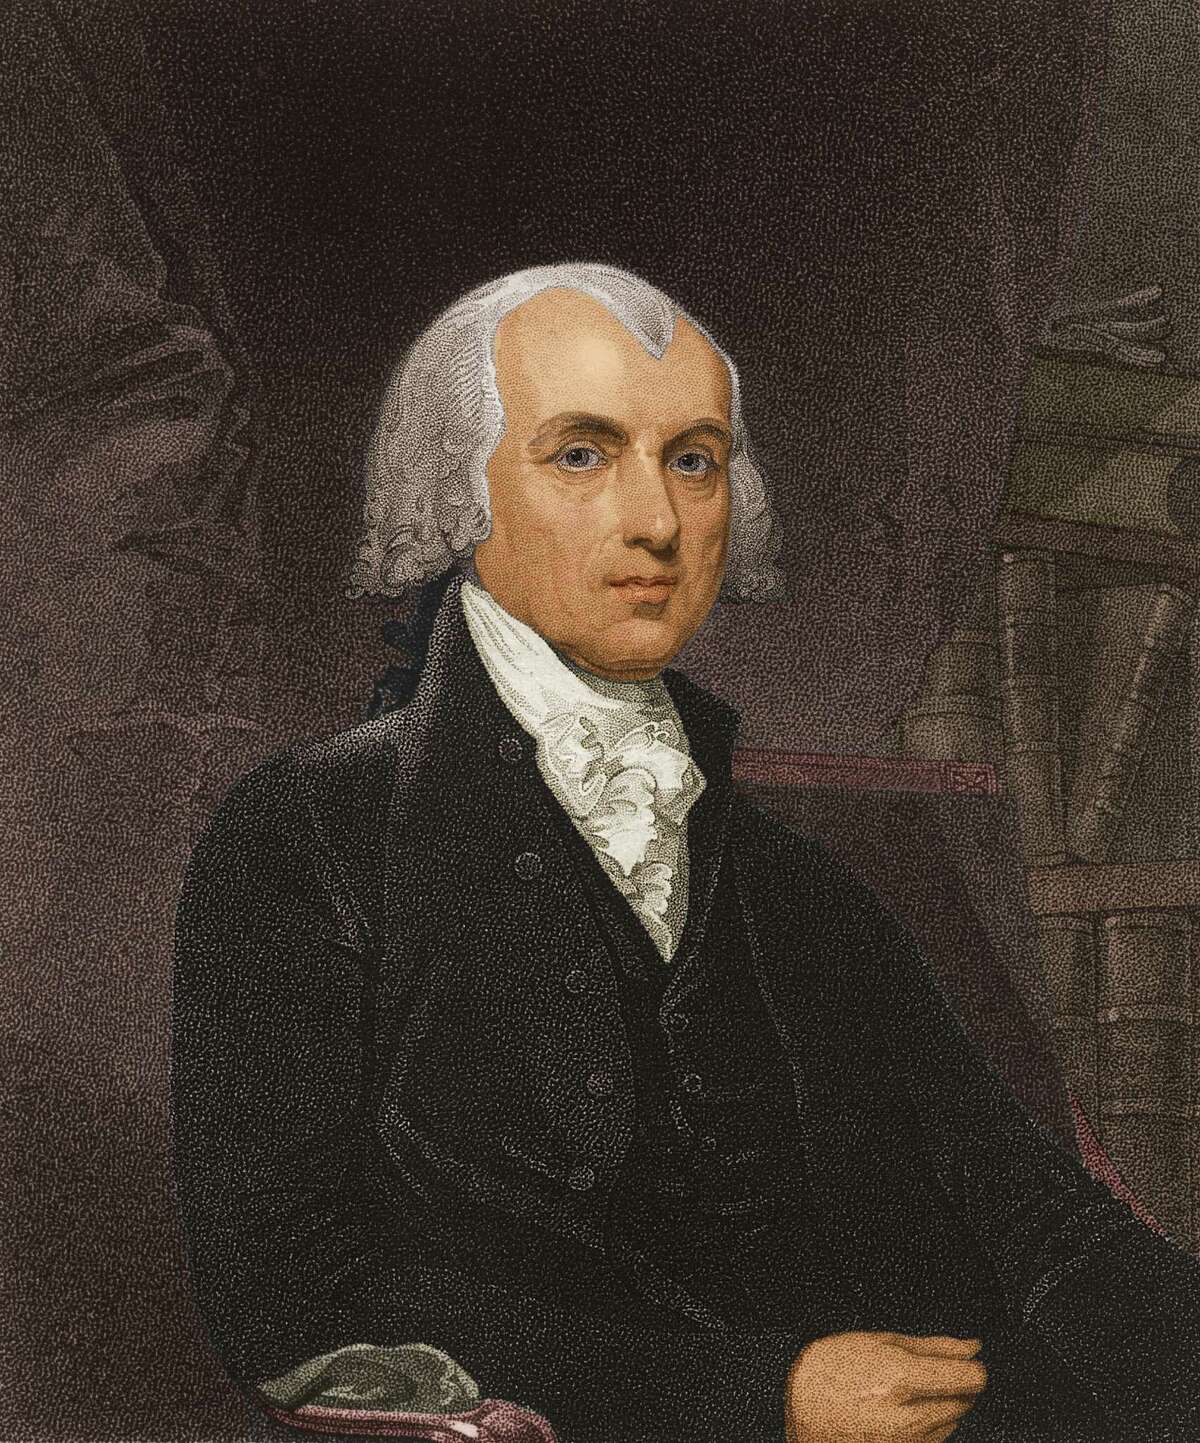 Who wrote the First Amendment? James Madison, fourth president of the United States of America, drafted the First Amendment. He is referred to as "The Father of the Constitution." Read more about James Madison